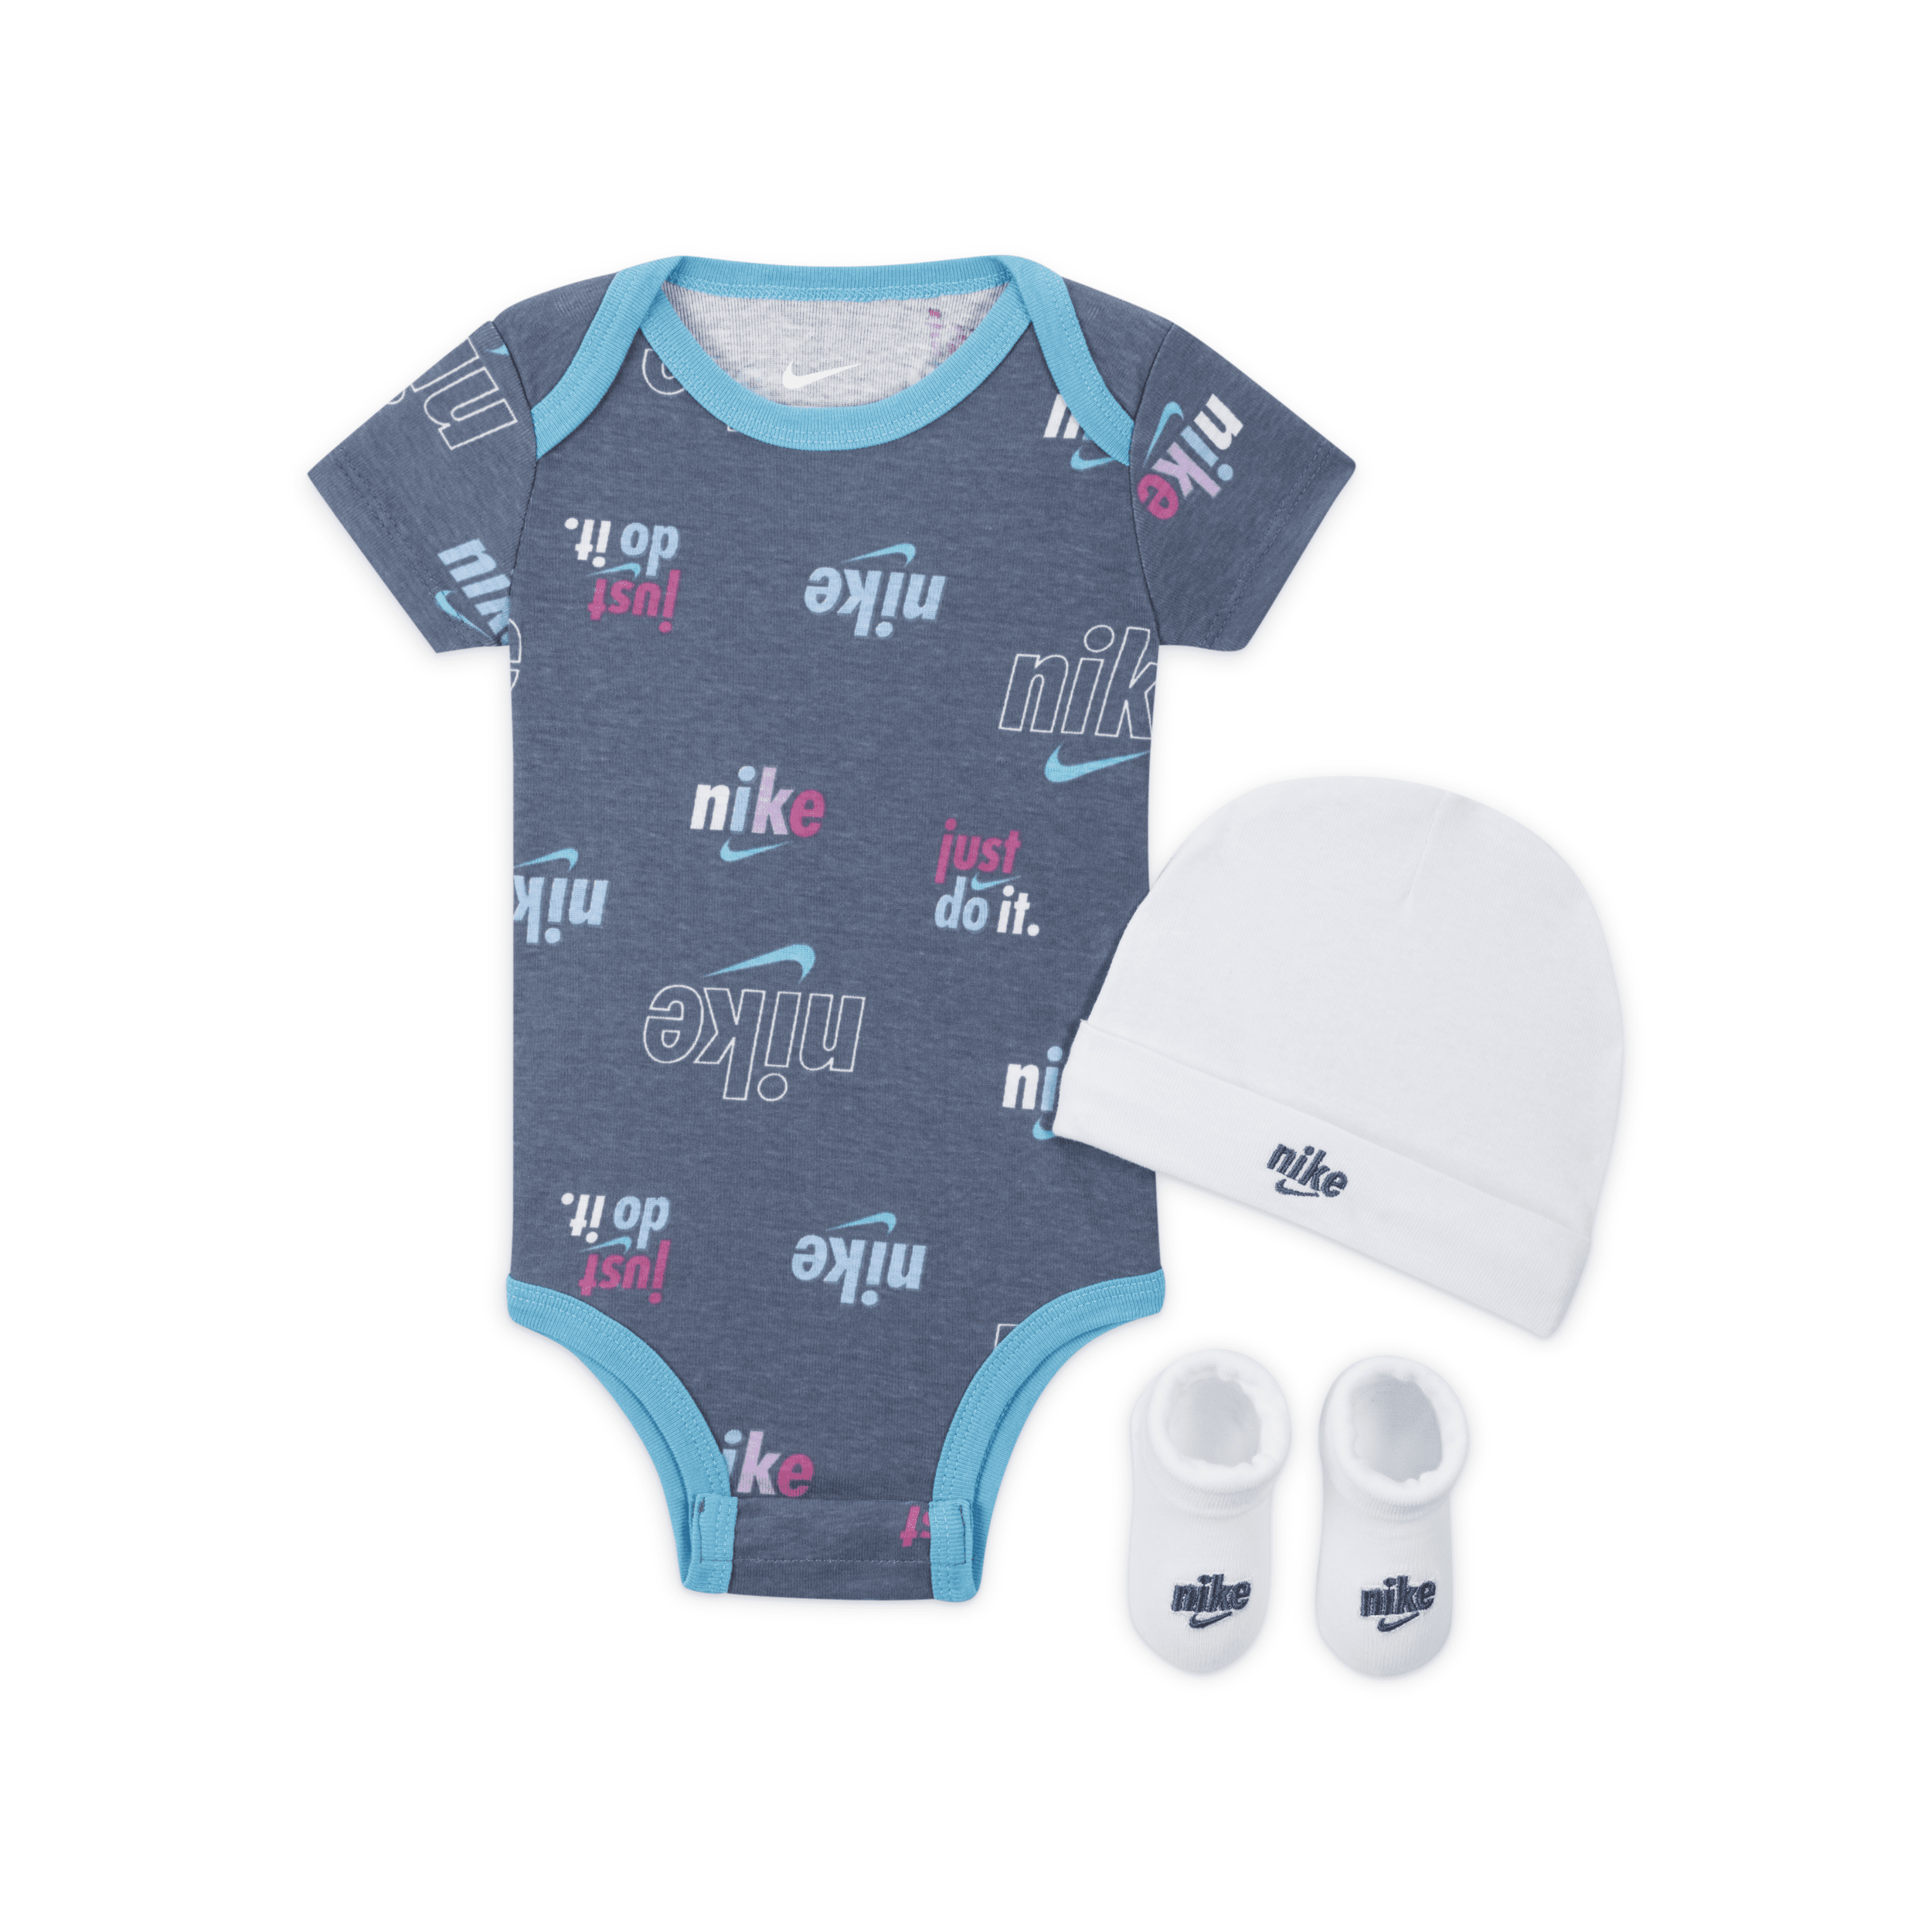 Nike E1d1 Neutral 3-piece Gift Set Baby 3-piece Box Set In Blue